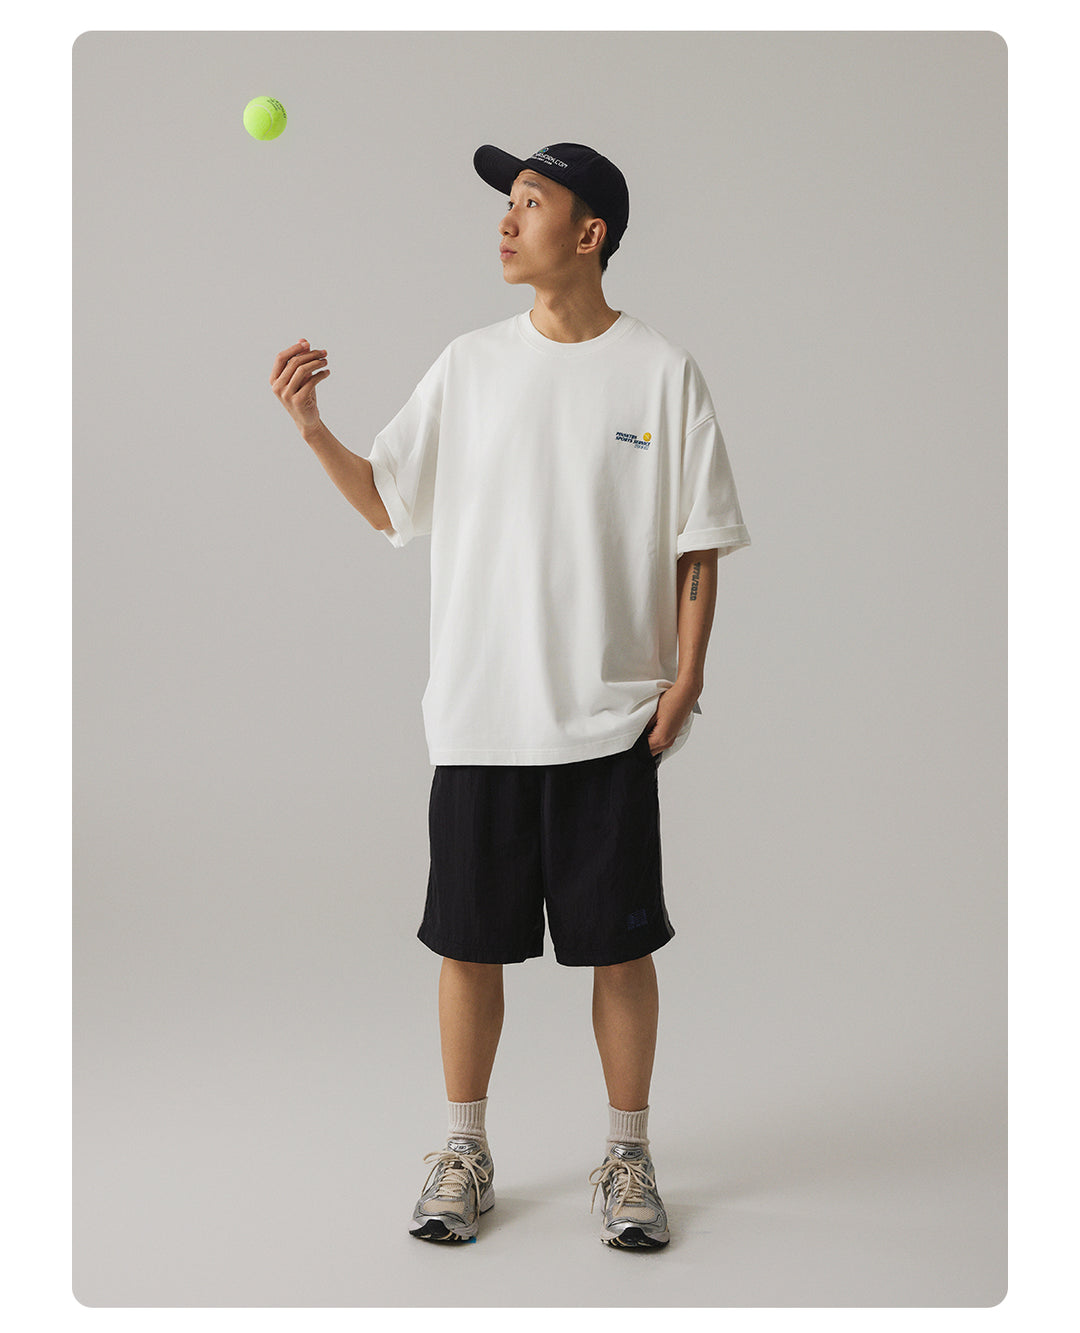 Tennis Sports Services Tee